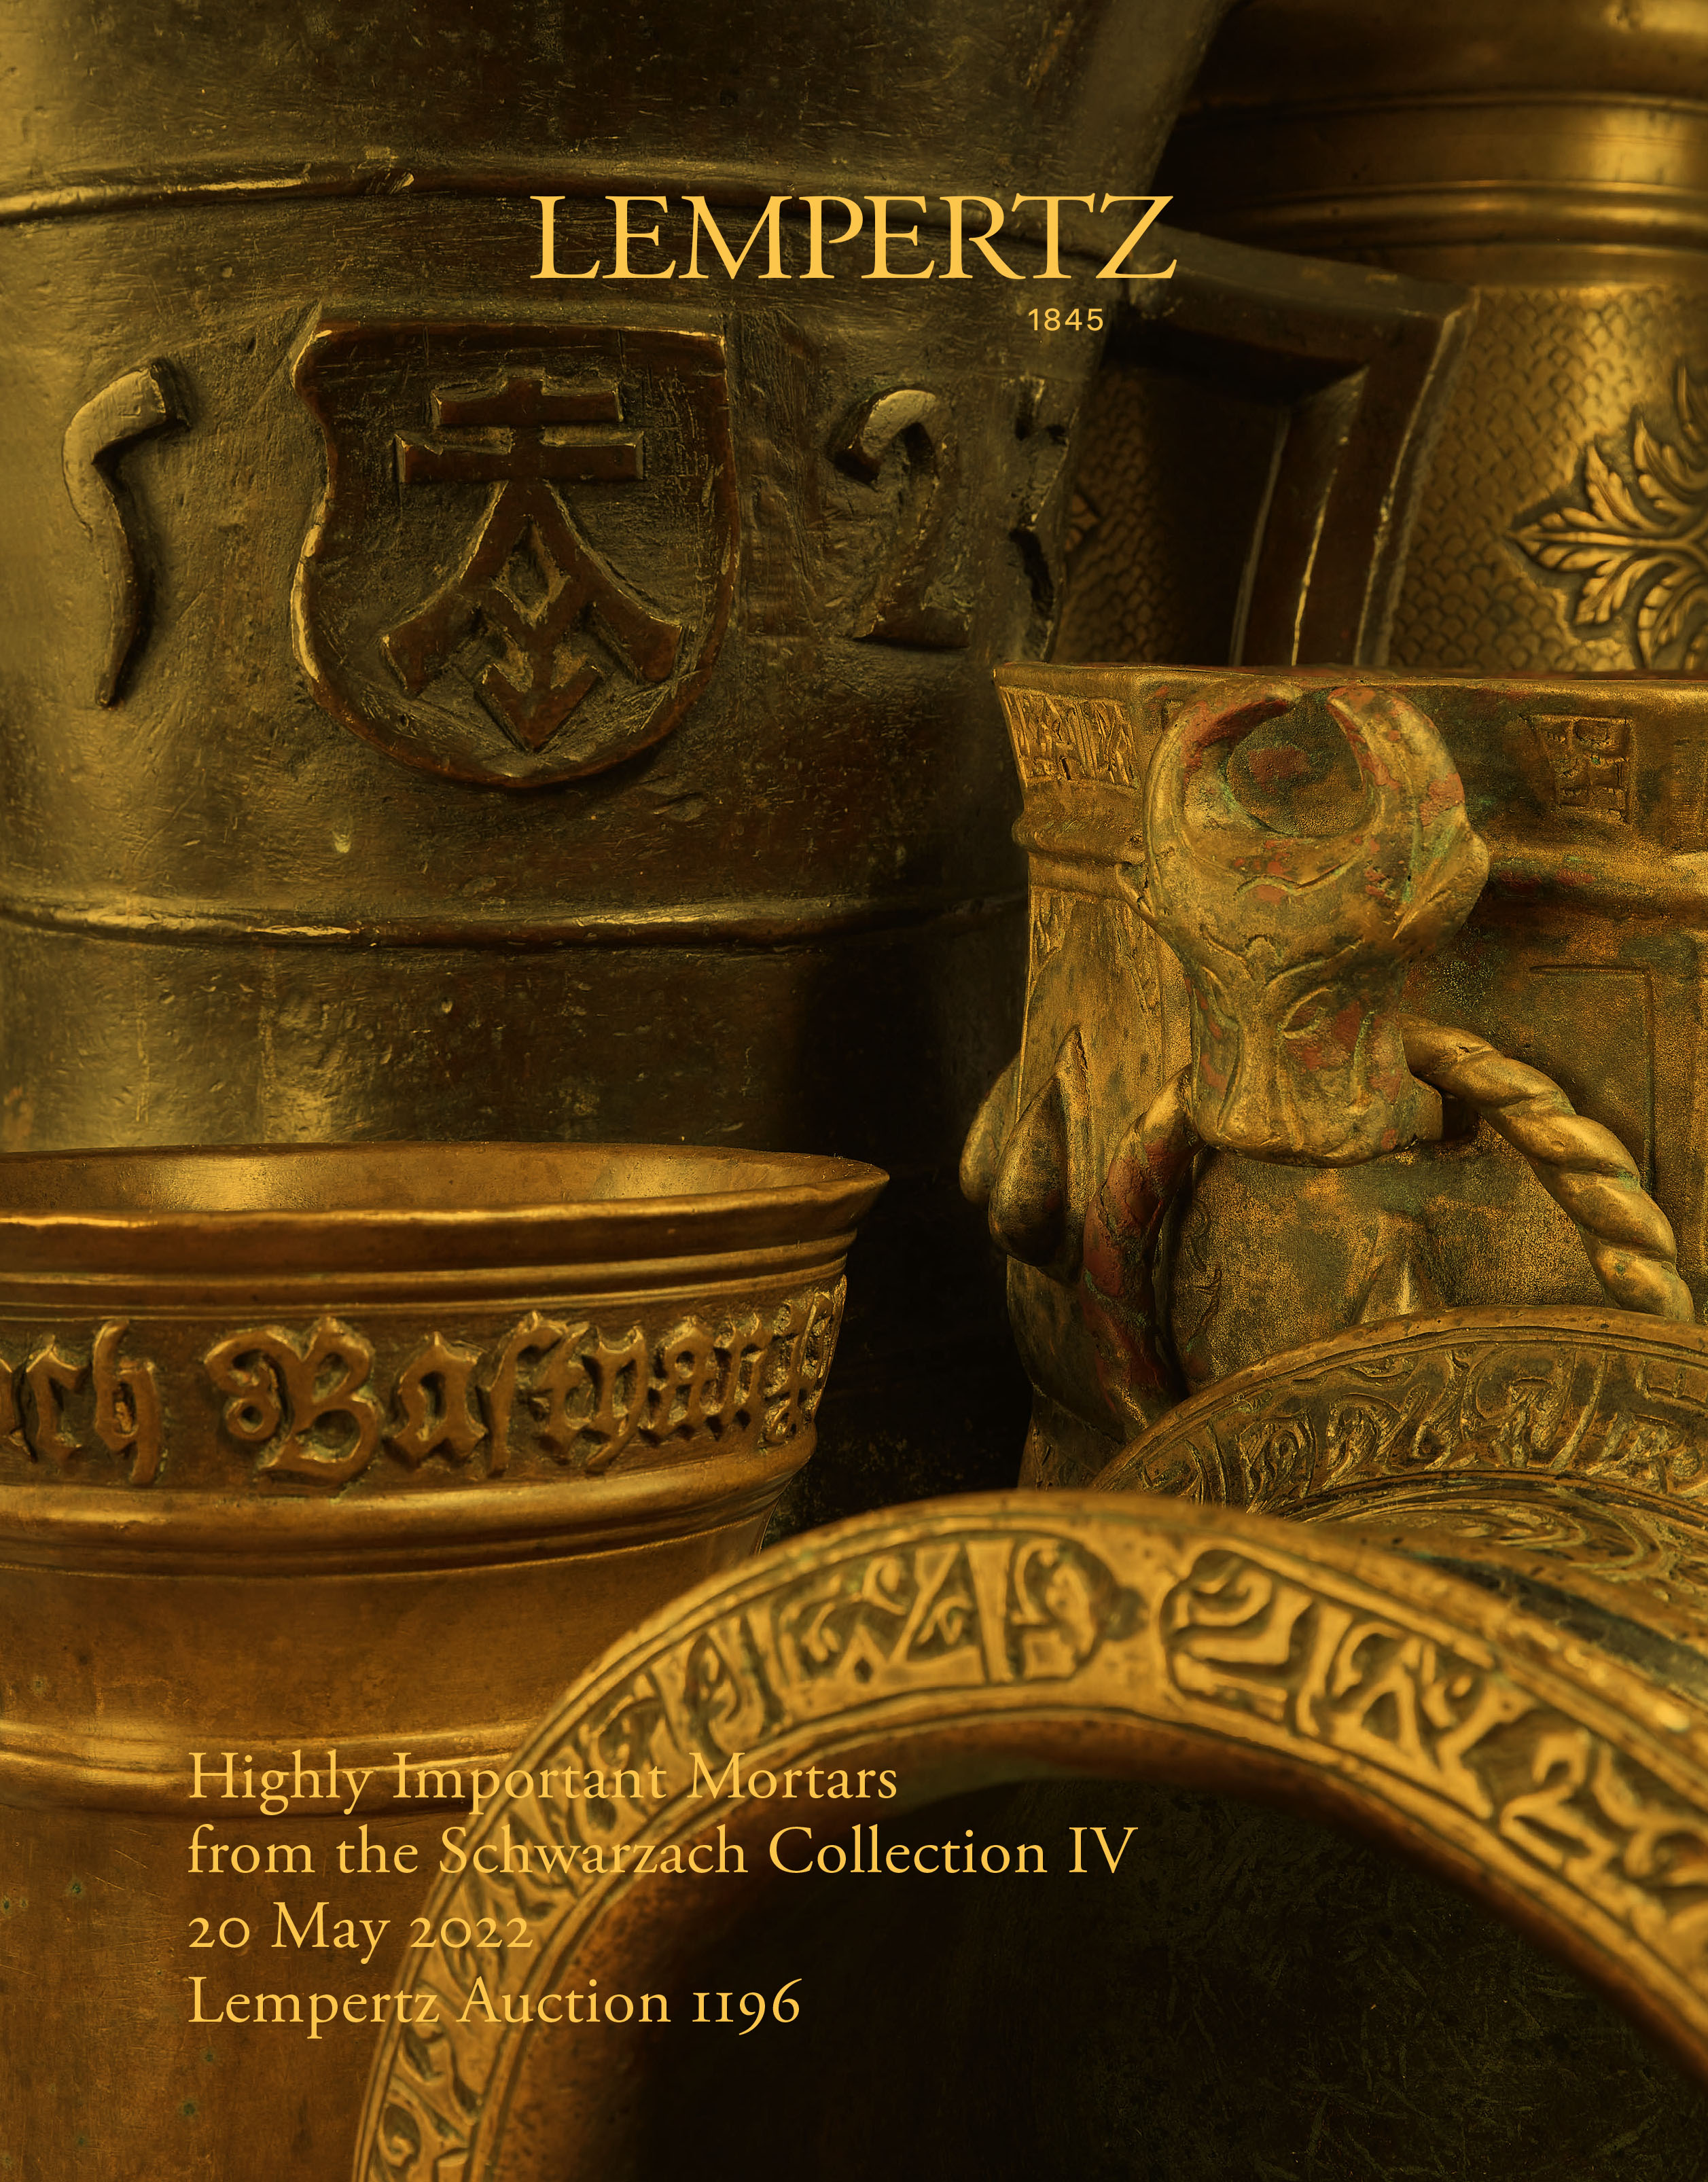 Catalogue - Highly Important Mortars from the Schwarzach Collection Part IV. - Online Catalogue - Auction 1196 – Purchase valuable works of art at the next Lempertz-Auction!